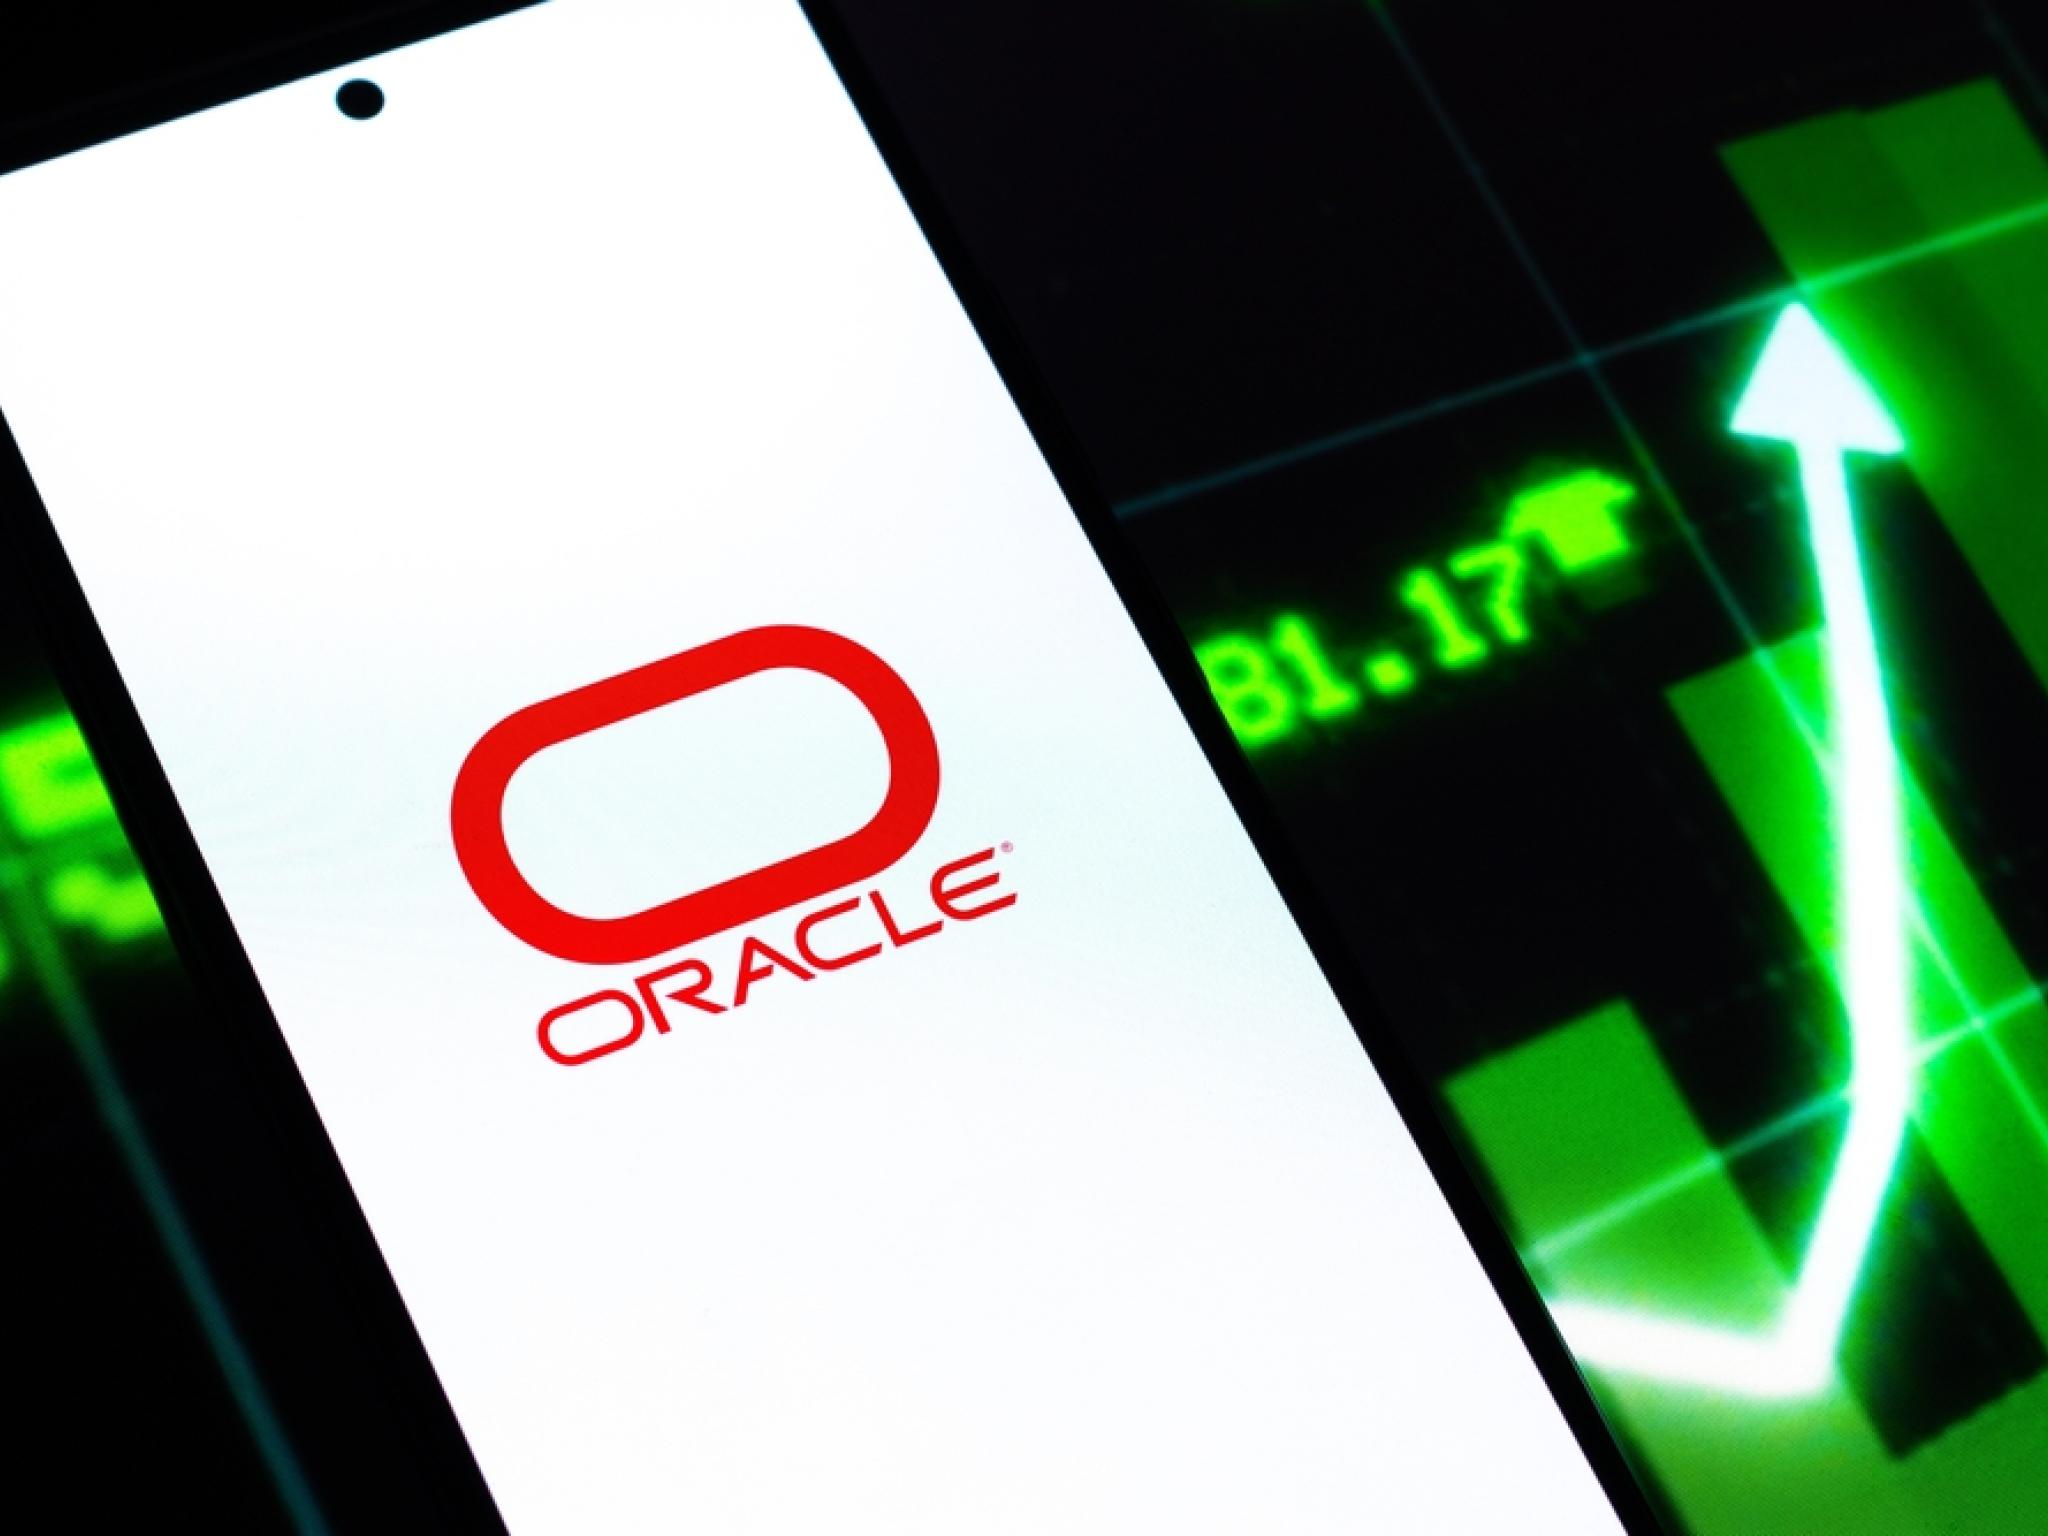  oracle-stock-climbs-on-reports-of-deal-with-musks-xai-is-there-more-upside-ahead 